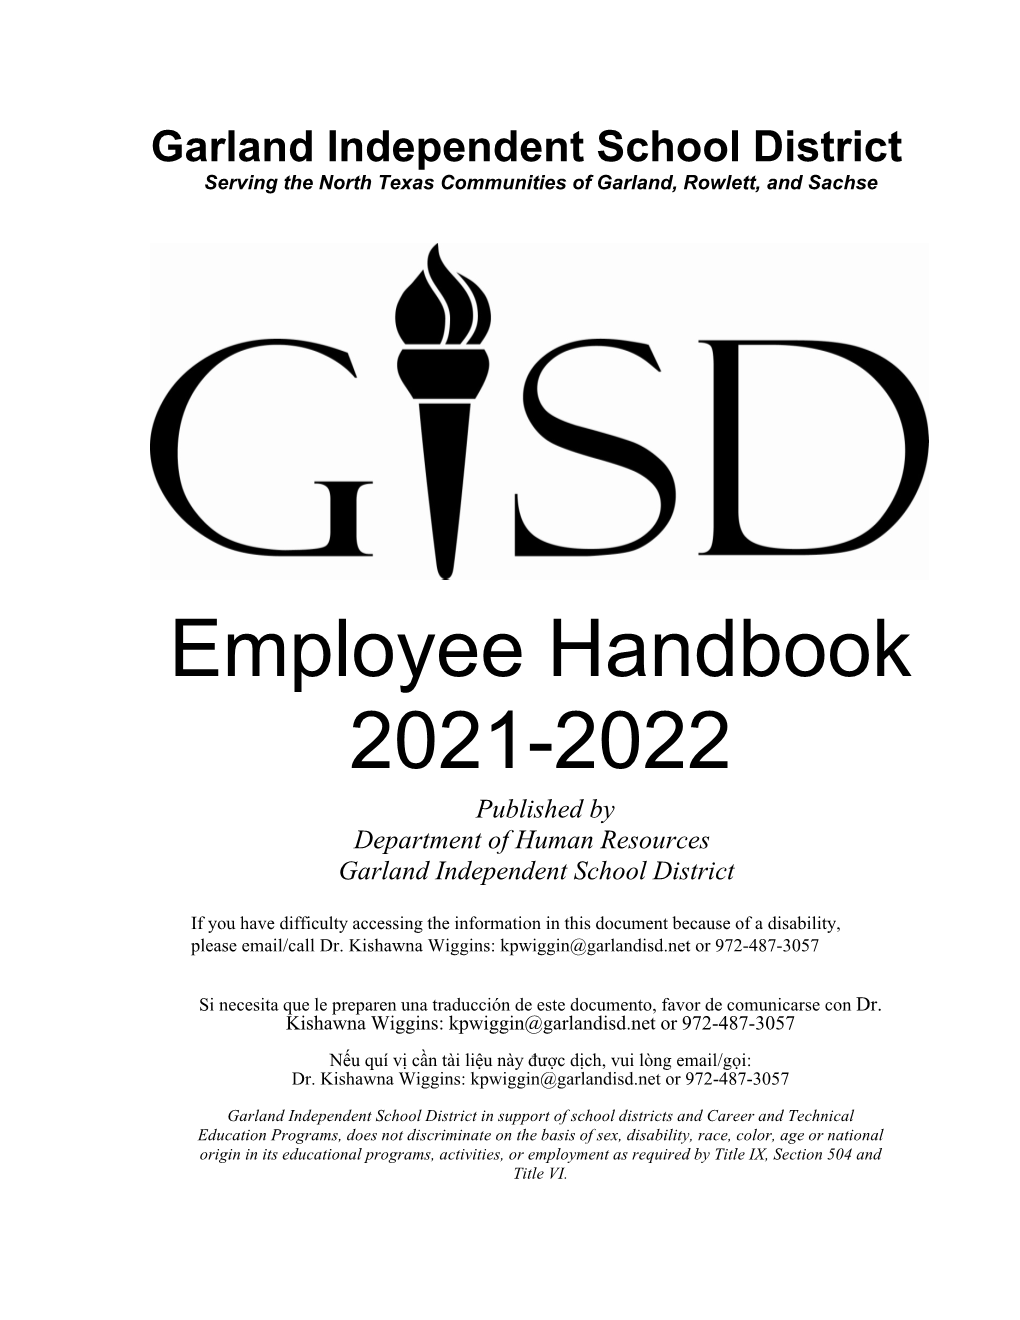 Employee Handbook 2021-2022 Published by Department of Human Resources Garland Independent School District